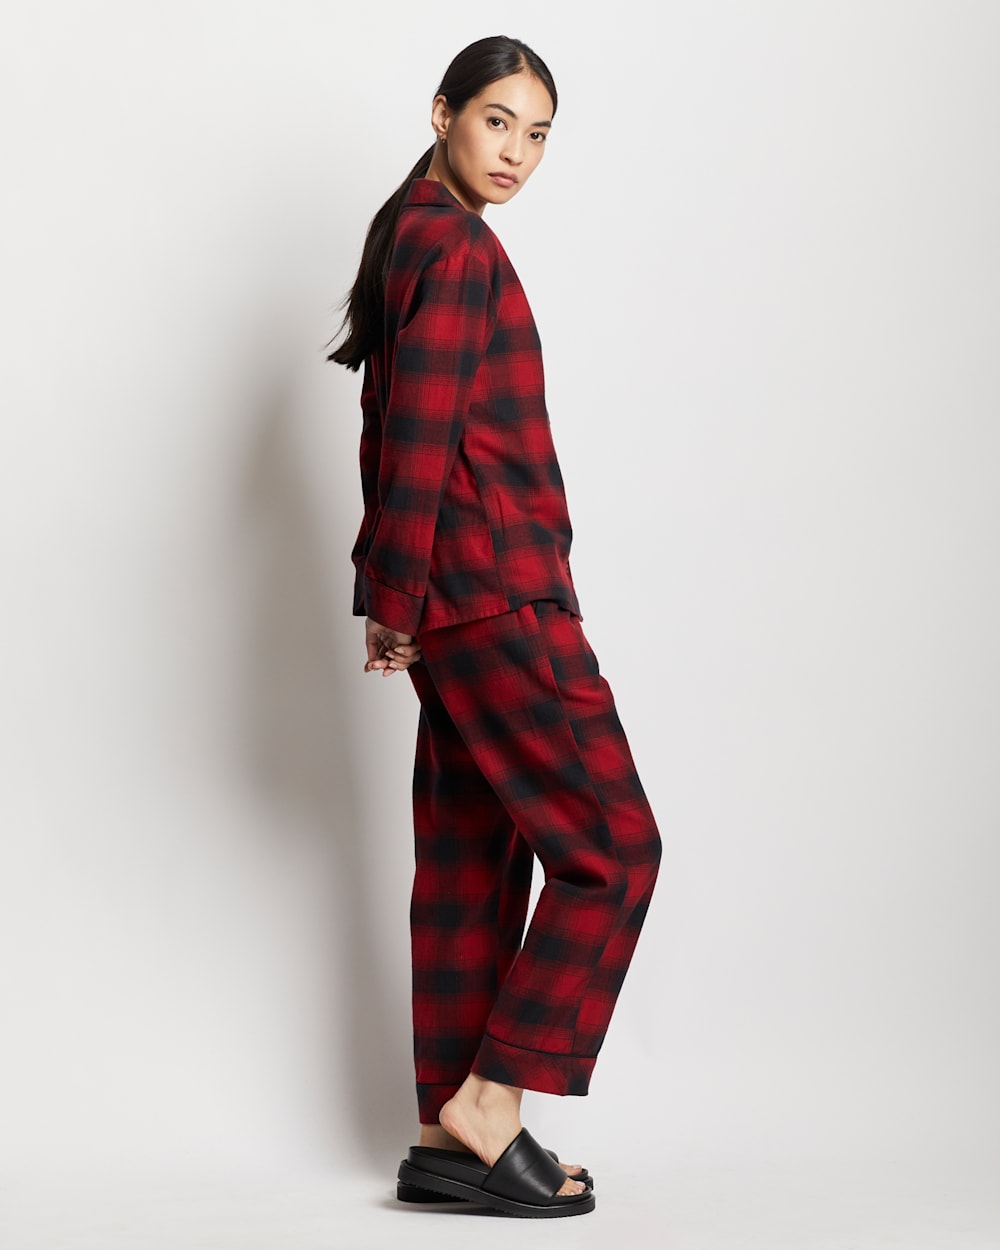 ALTERNATE VIEW OF WOMEN'S PAJAMA SET IN RED/BLACK OMBRE image number 3